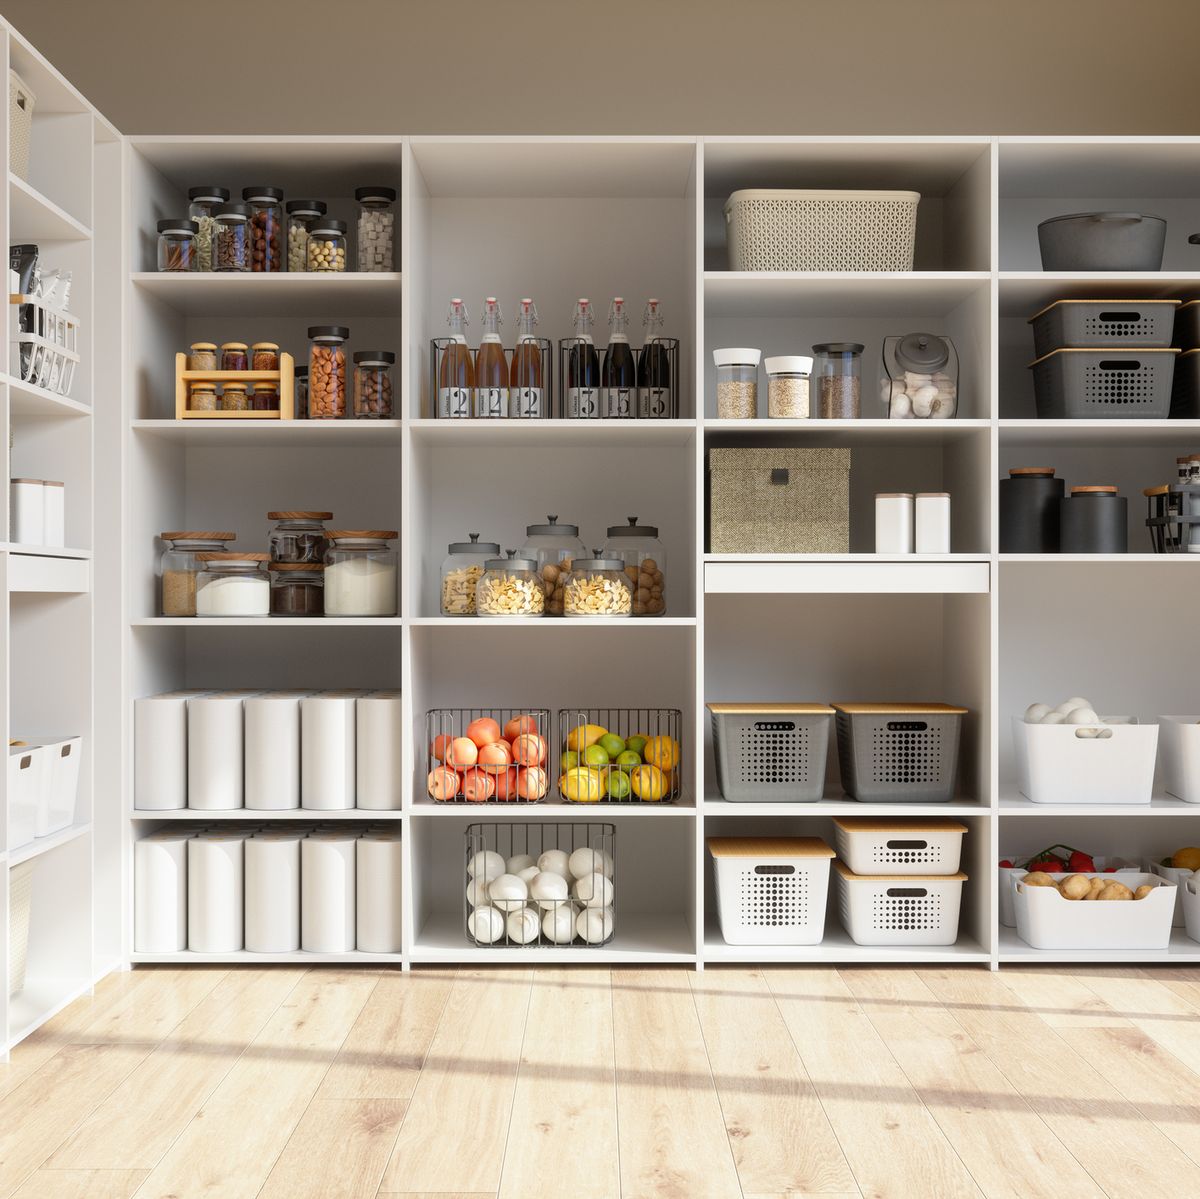 Home Organization Tips to Tidy Every Space in the House